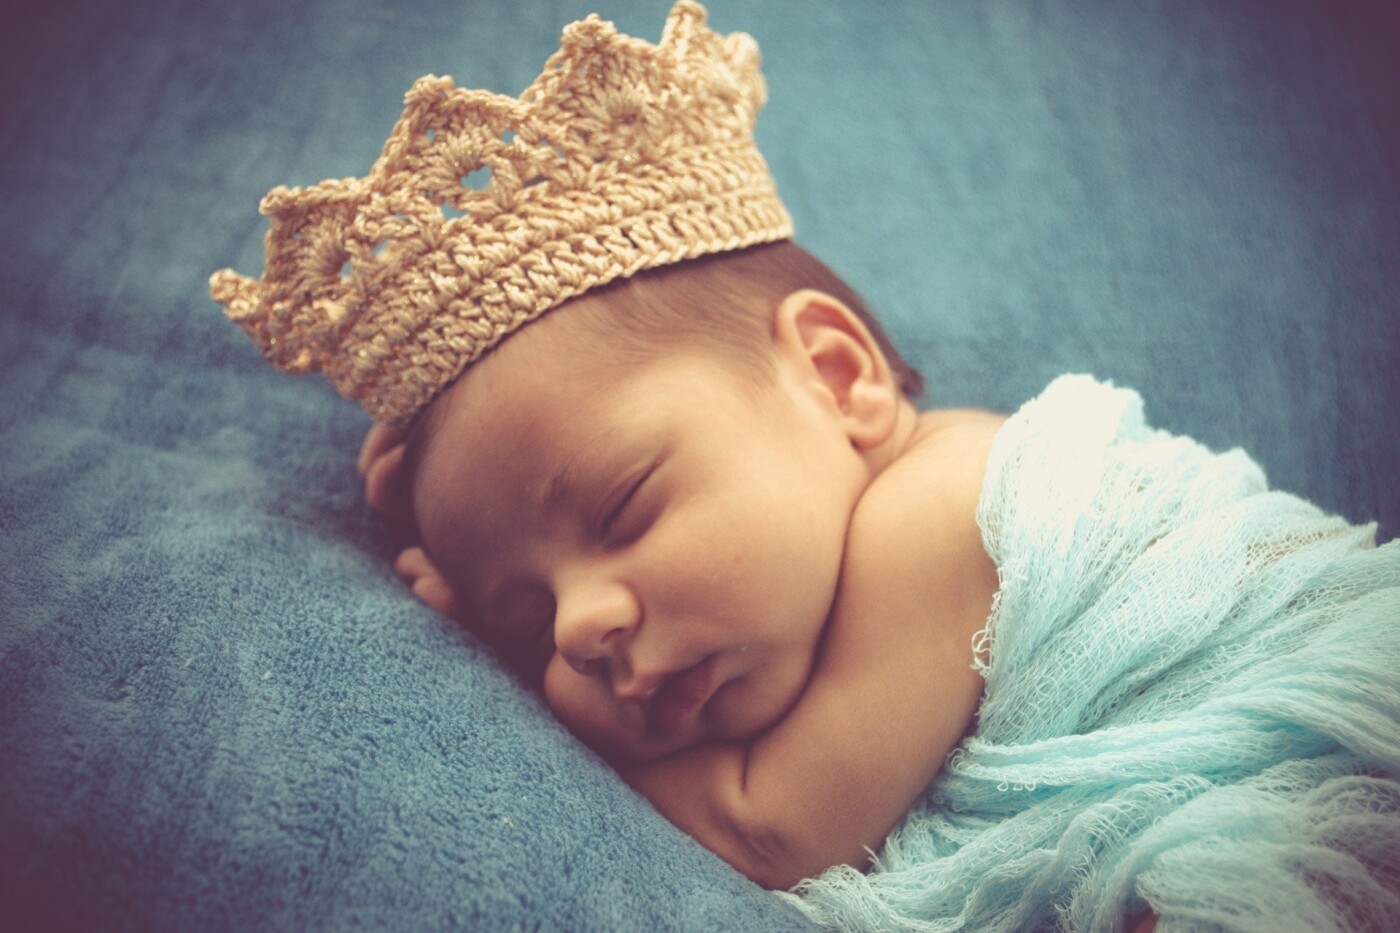 The baby prince